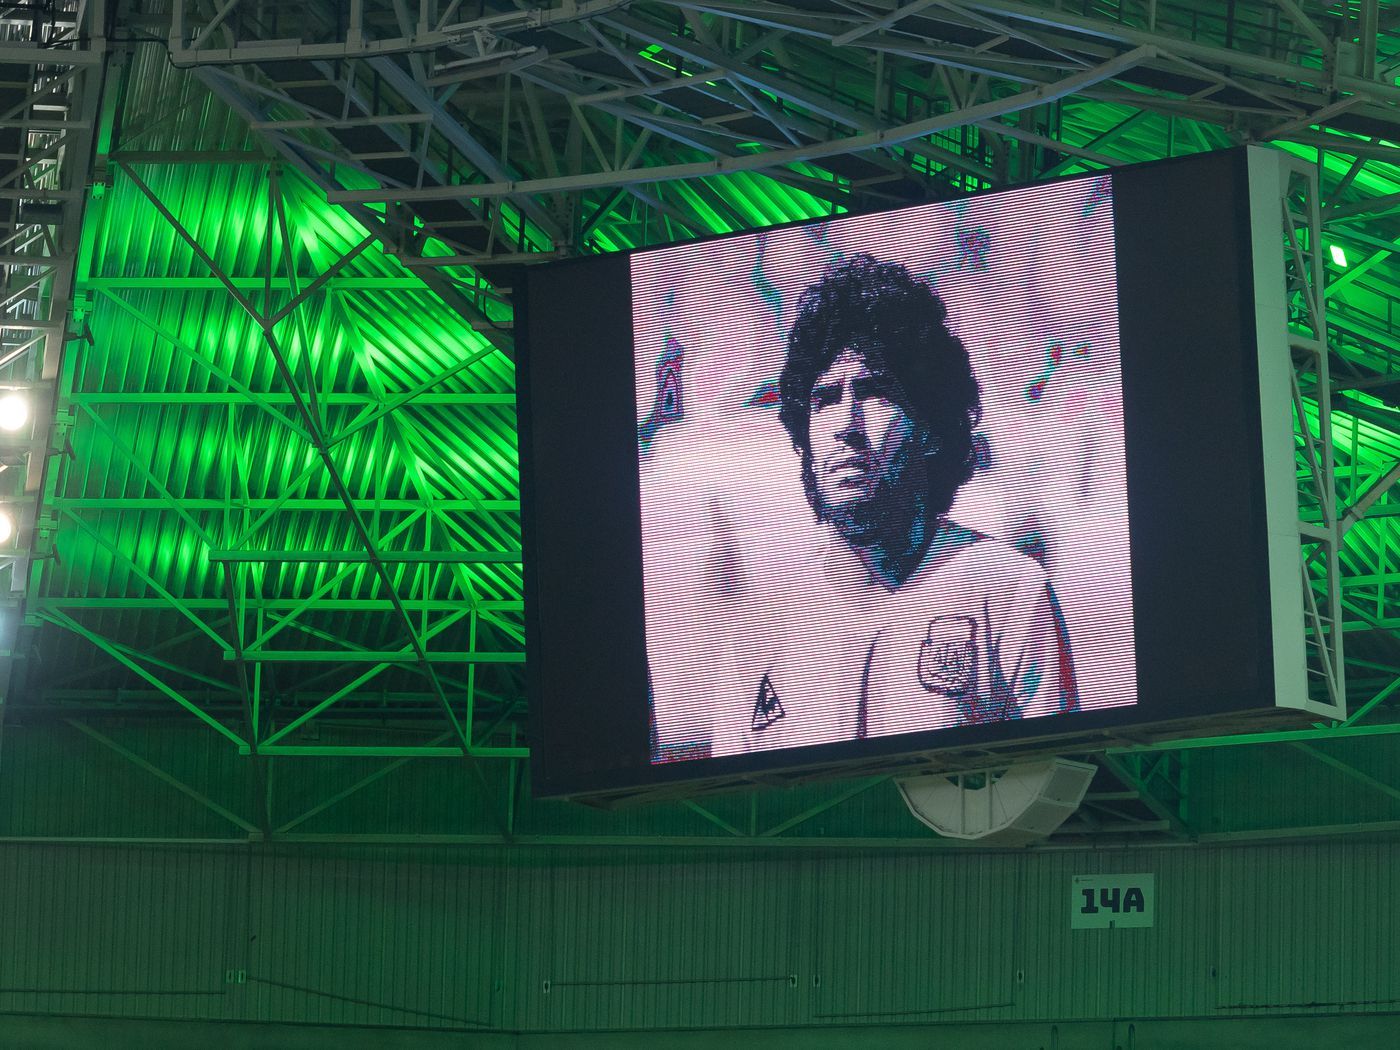 TFCLive reacts to the death of Argentine soccer legend Diego Maradona